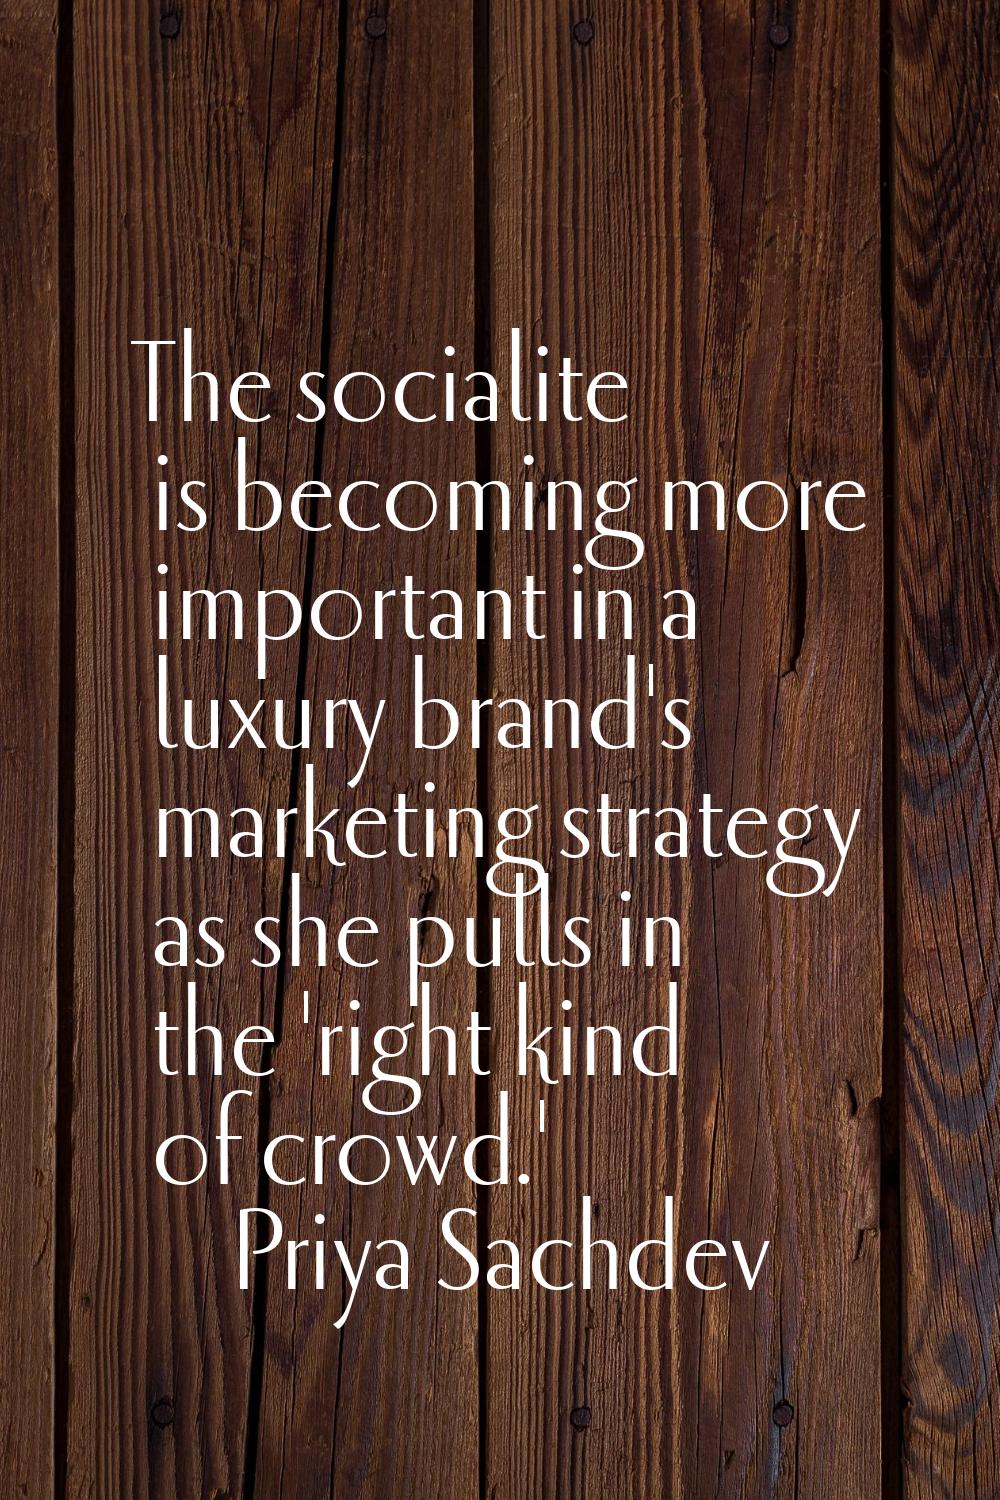 The socialite is becoming more important in a luxury brand's marketing strategy as she pulls in the